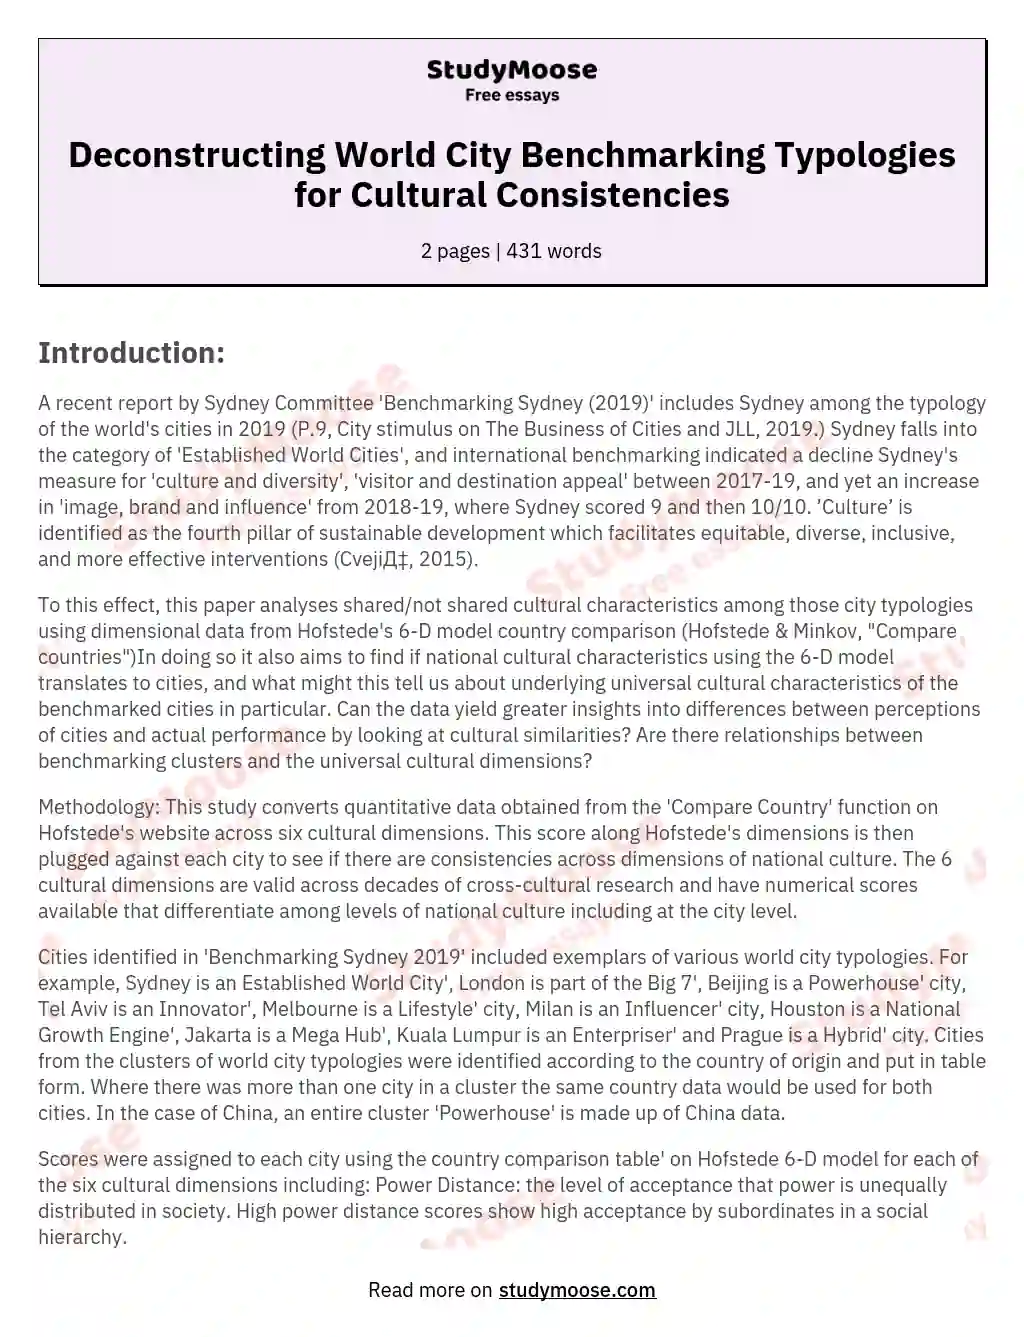 Deconstructing World City Benchmarking Typologies for Cultural Consistencies essay